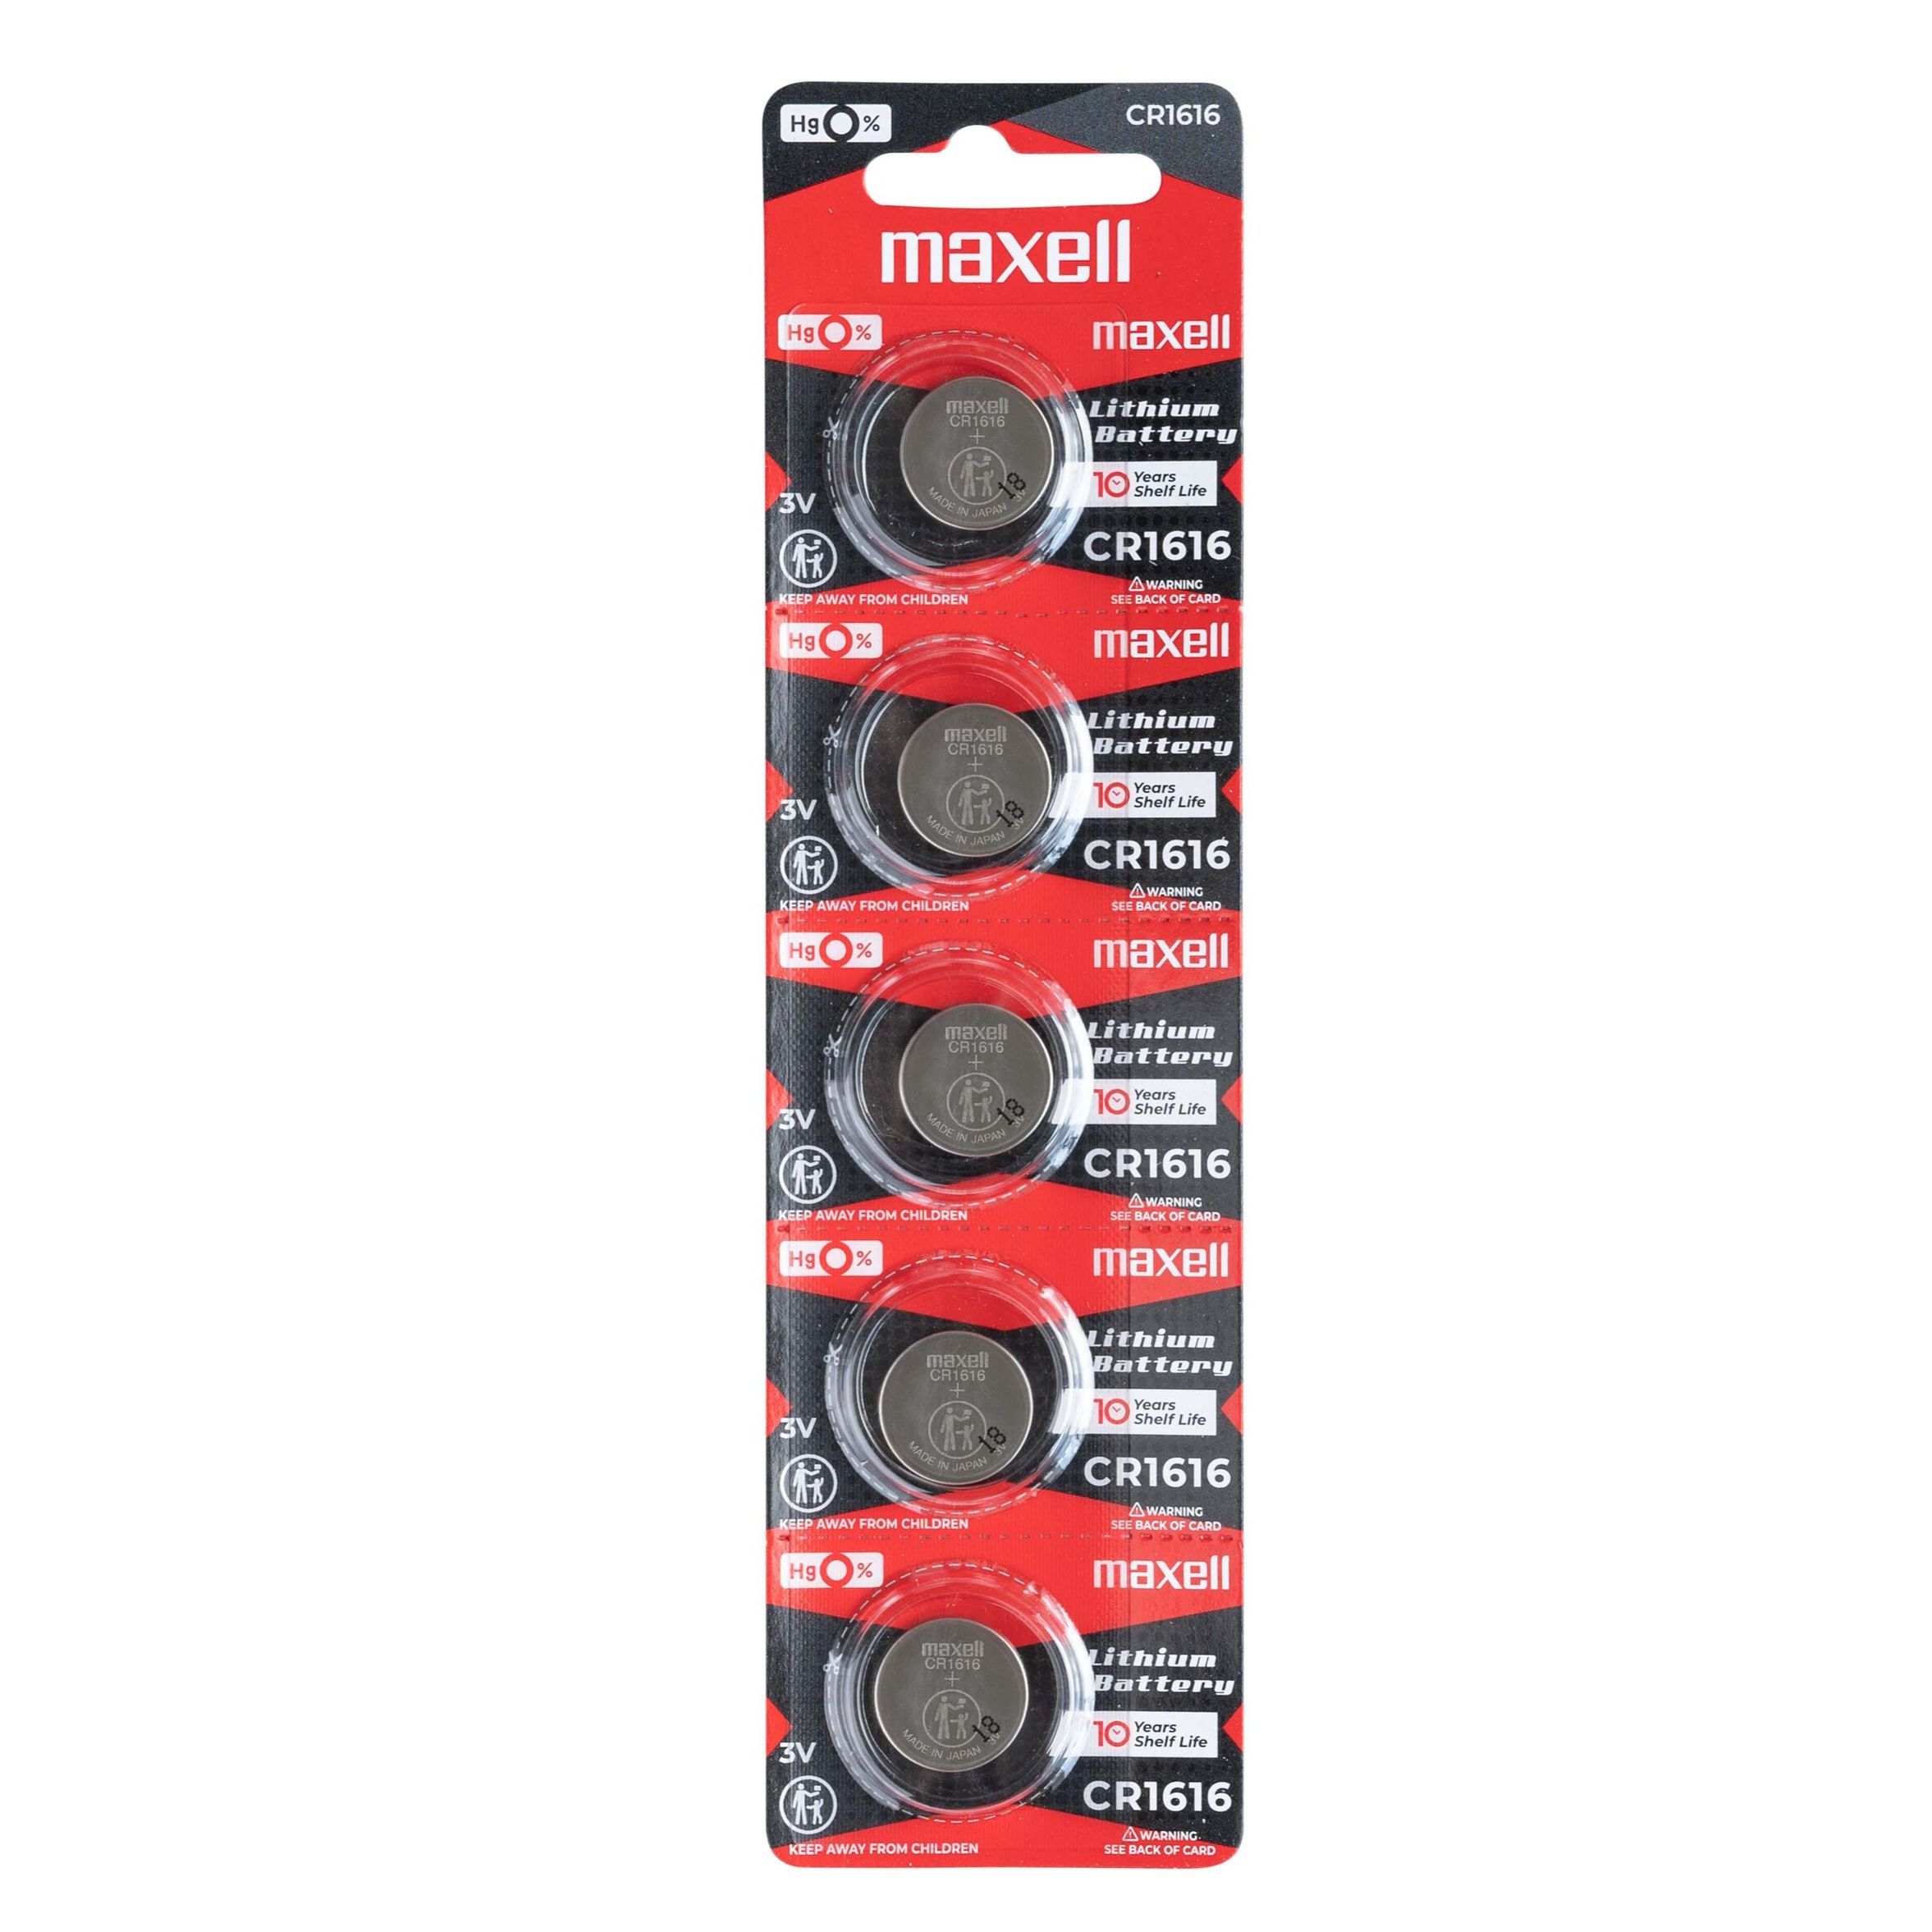 Maxell CR1616 3 Volt Lithium Coin Battery - 50 Pack + FREE